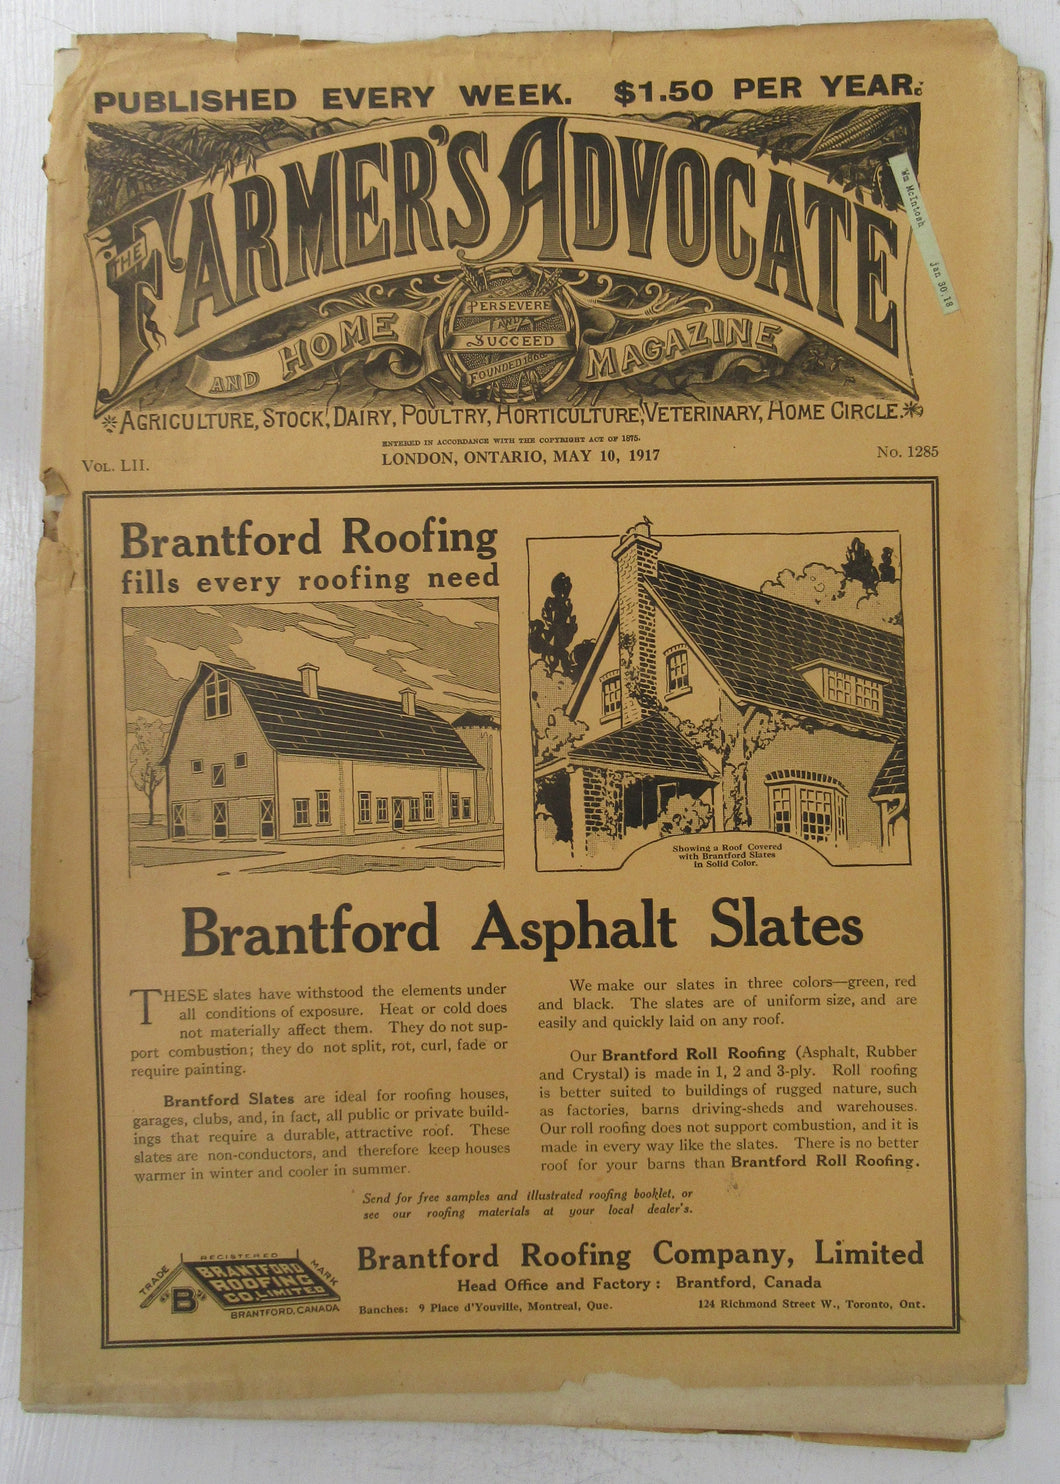 The Farmer's Advocate, May 10, 1917